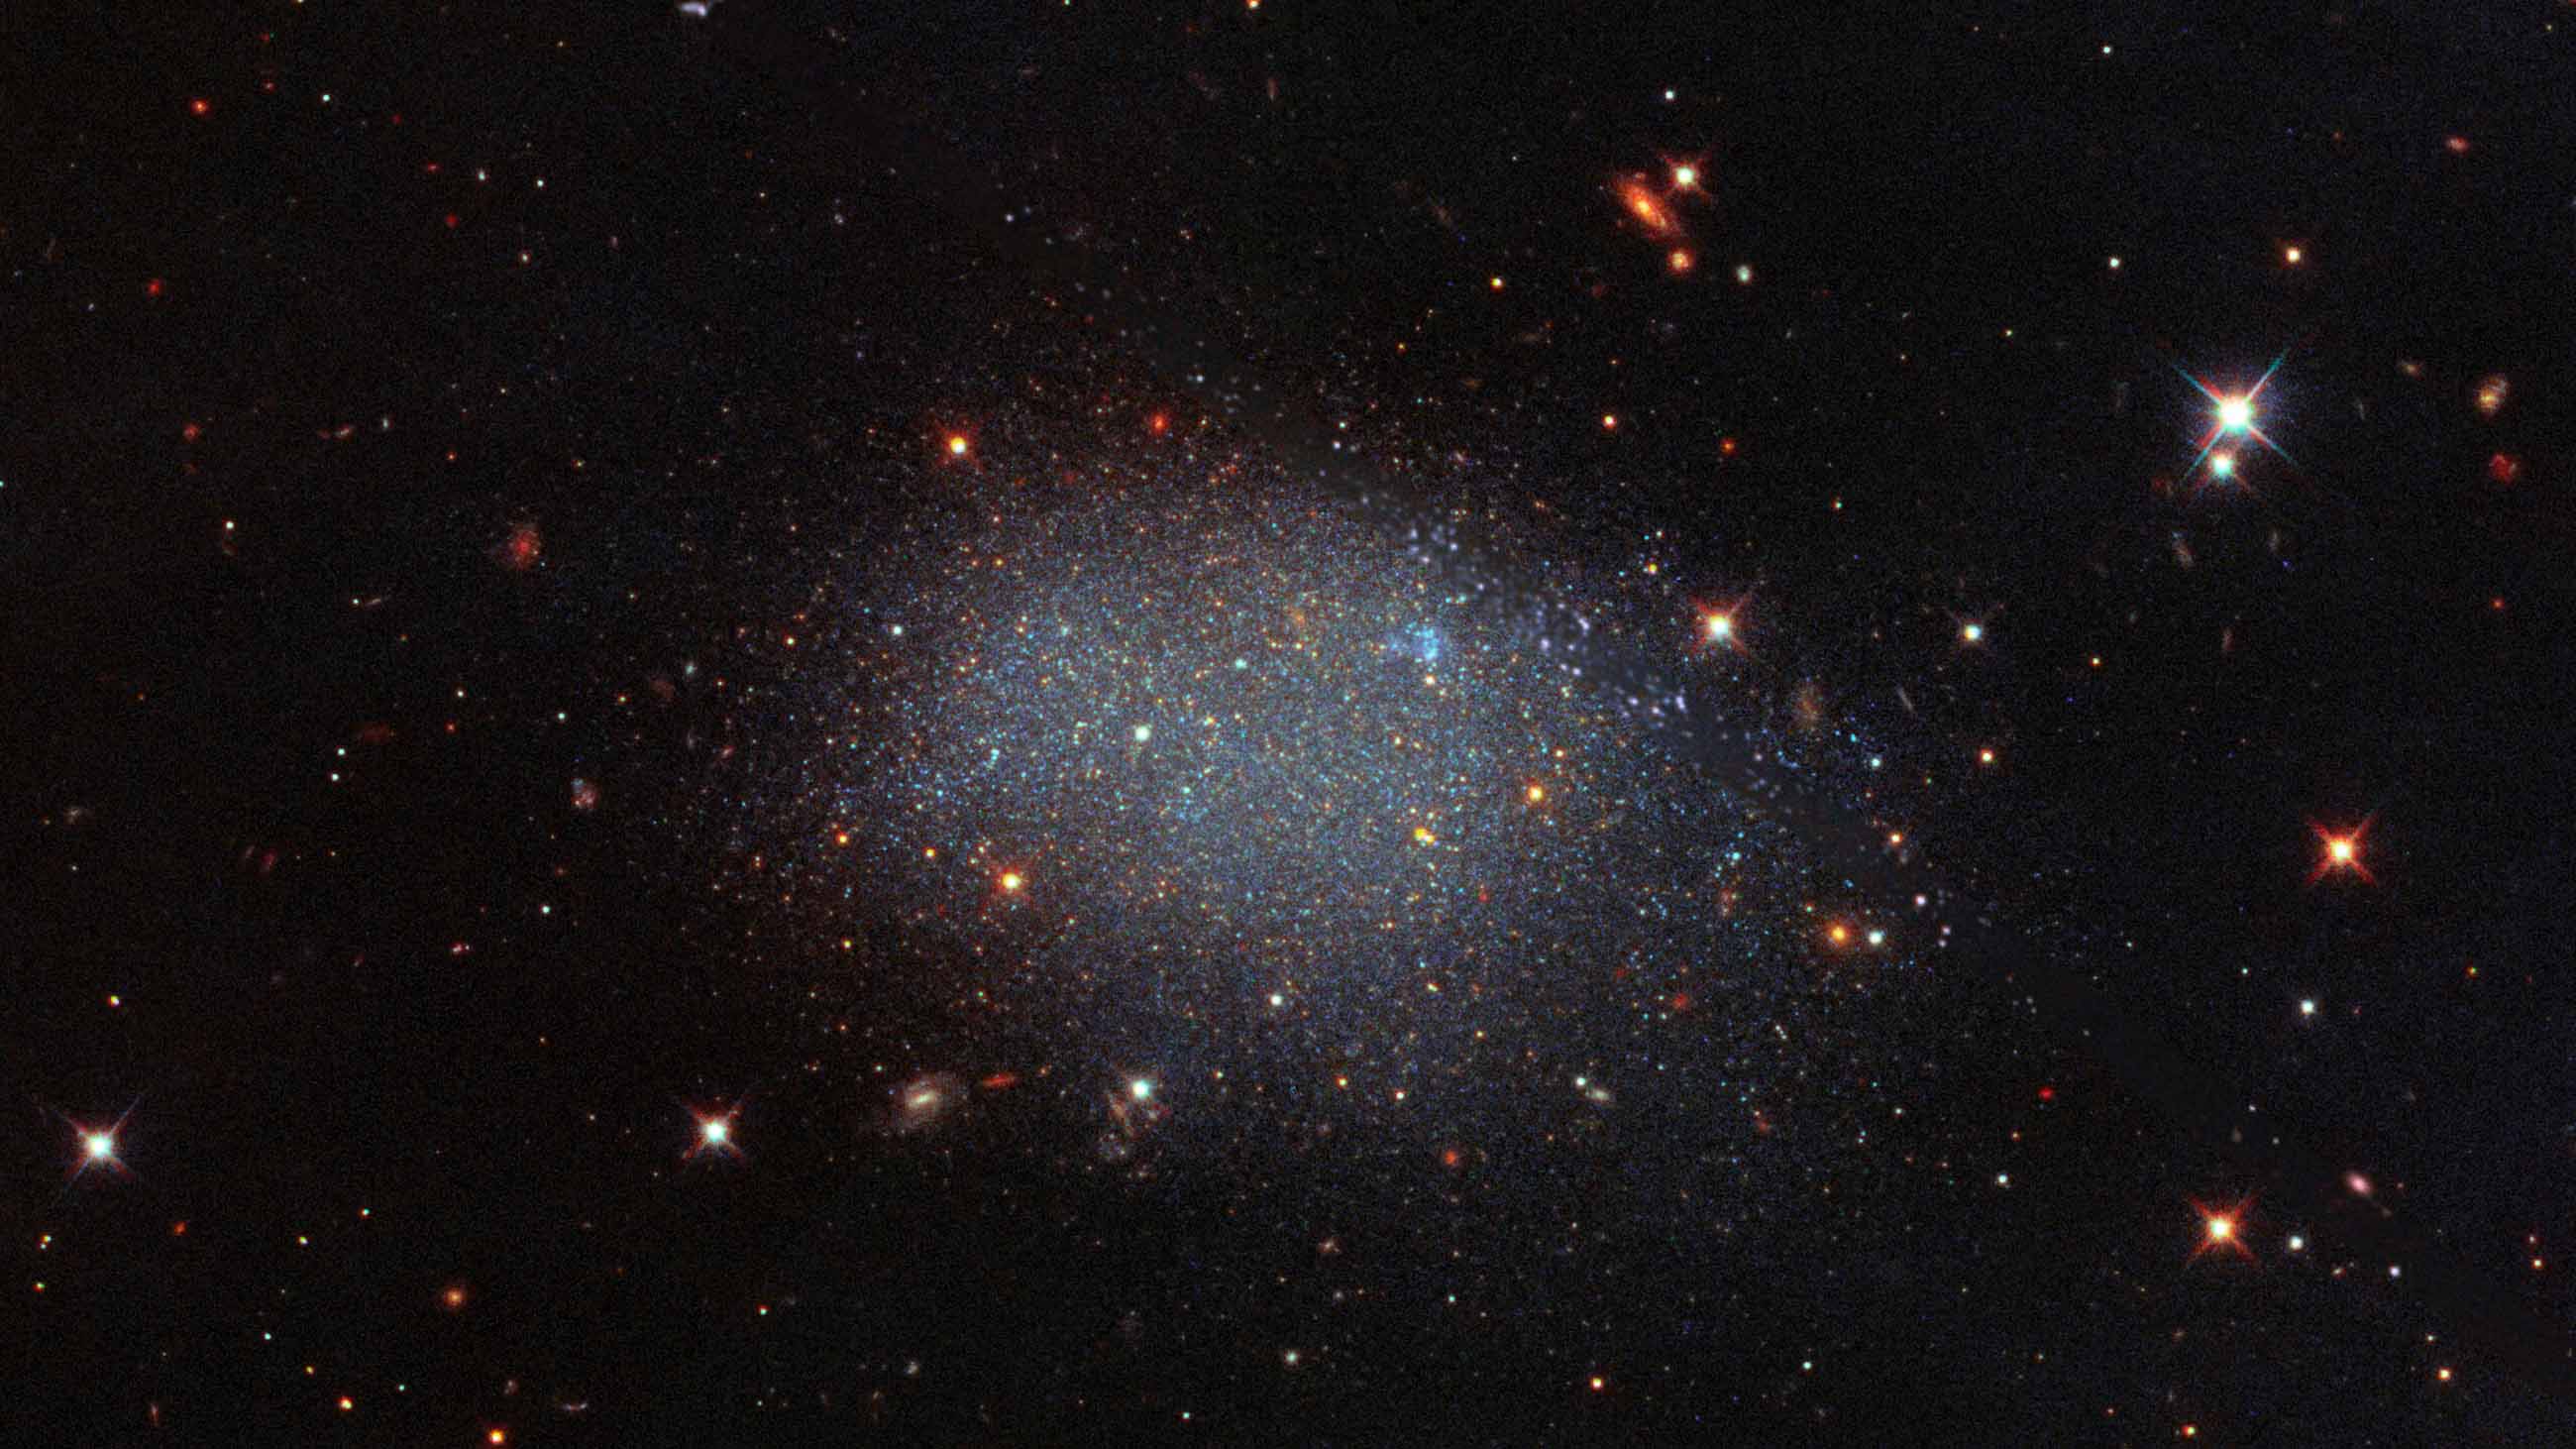 KK 246, also known as ESO 461-036, is a dwarf irregular galaxy residing within the Local Void, a vast region of empty space.